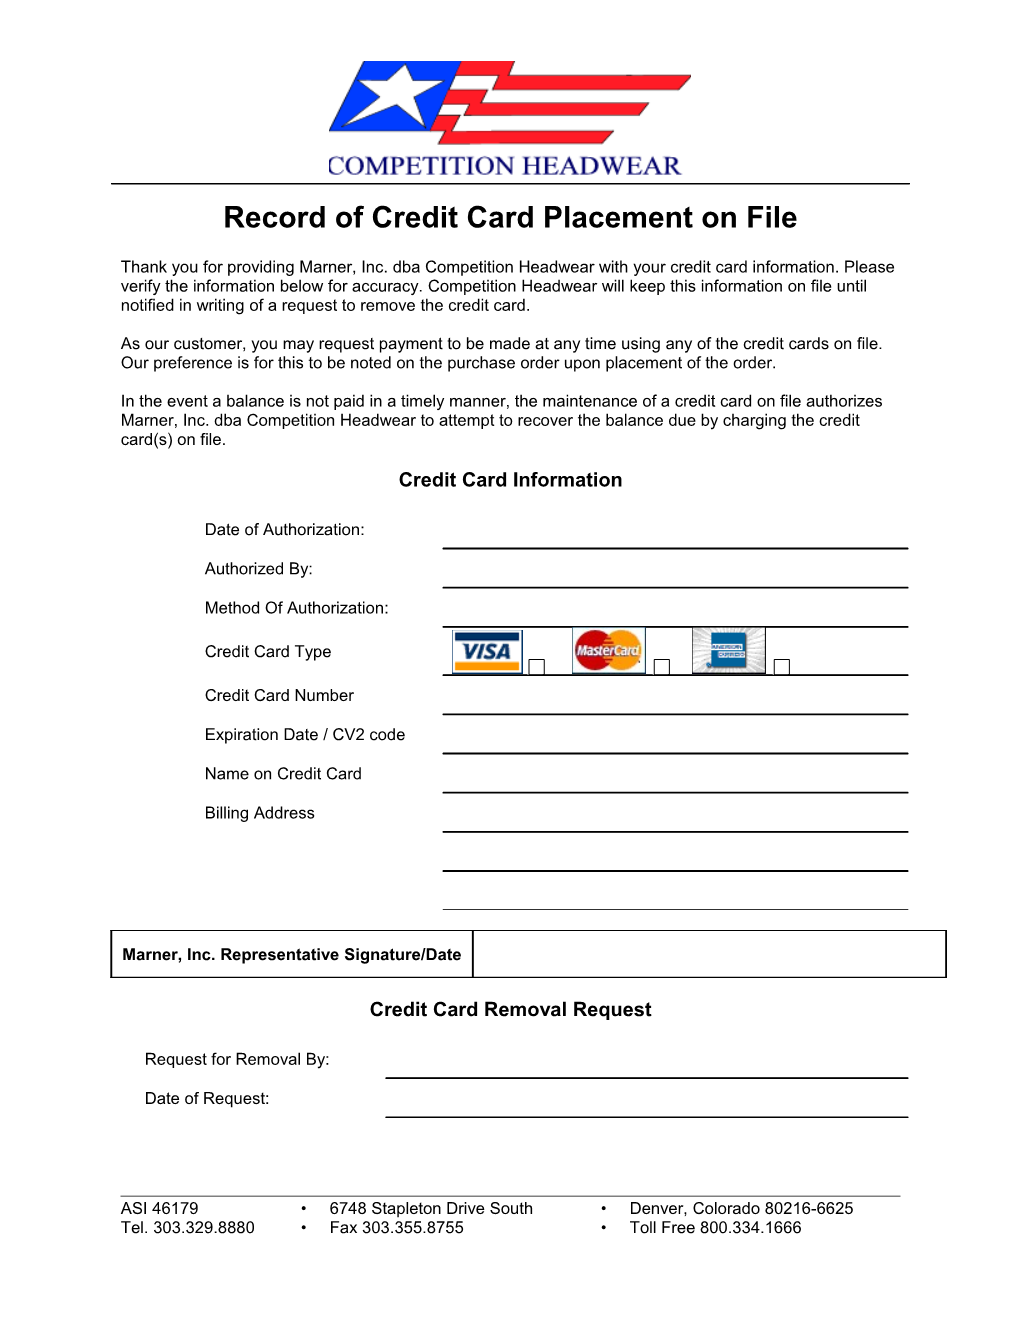 Credit Card Removal Request